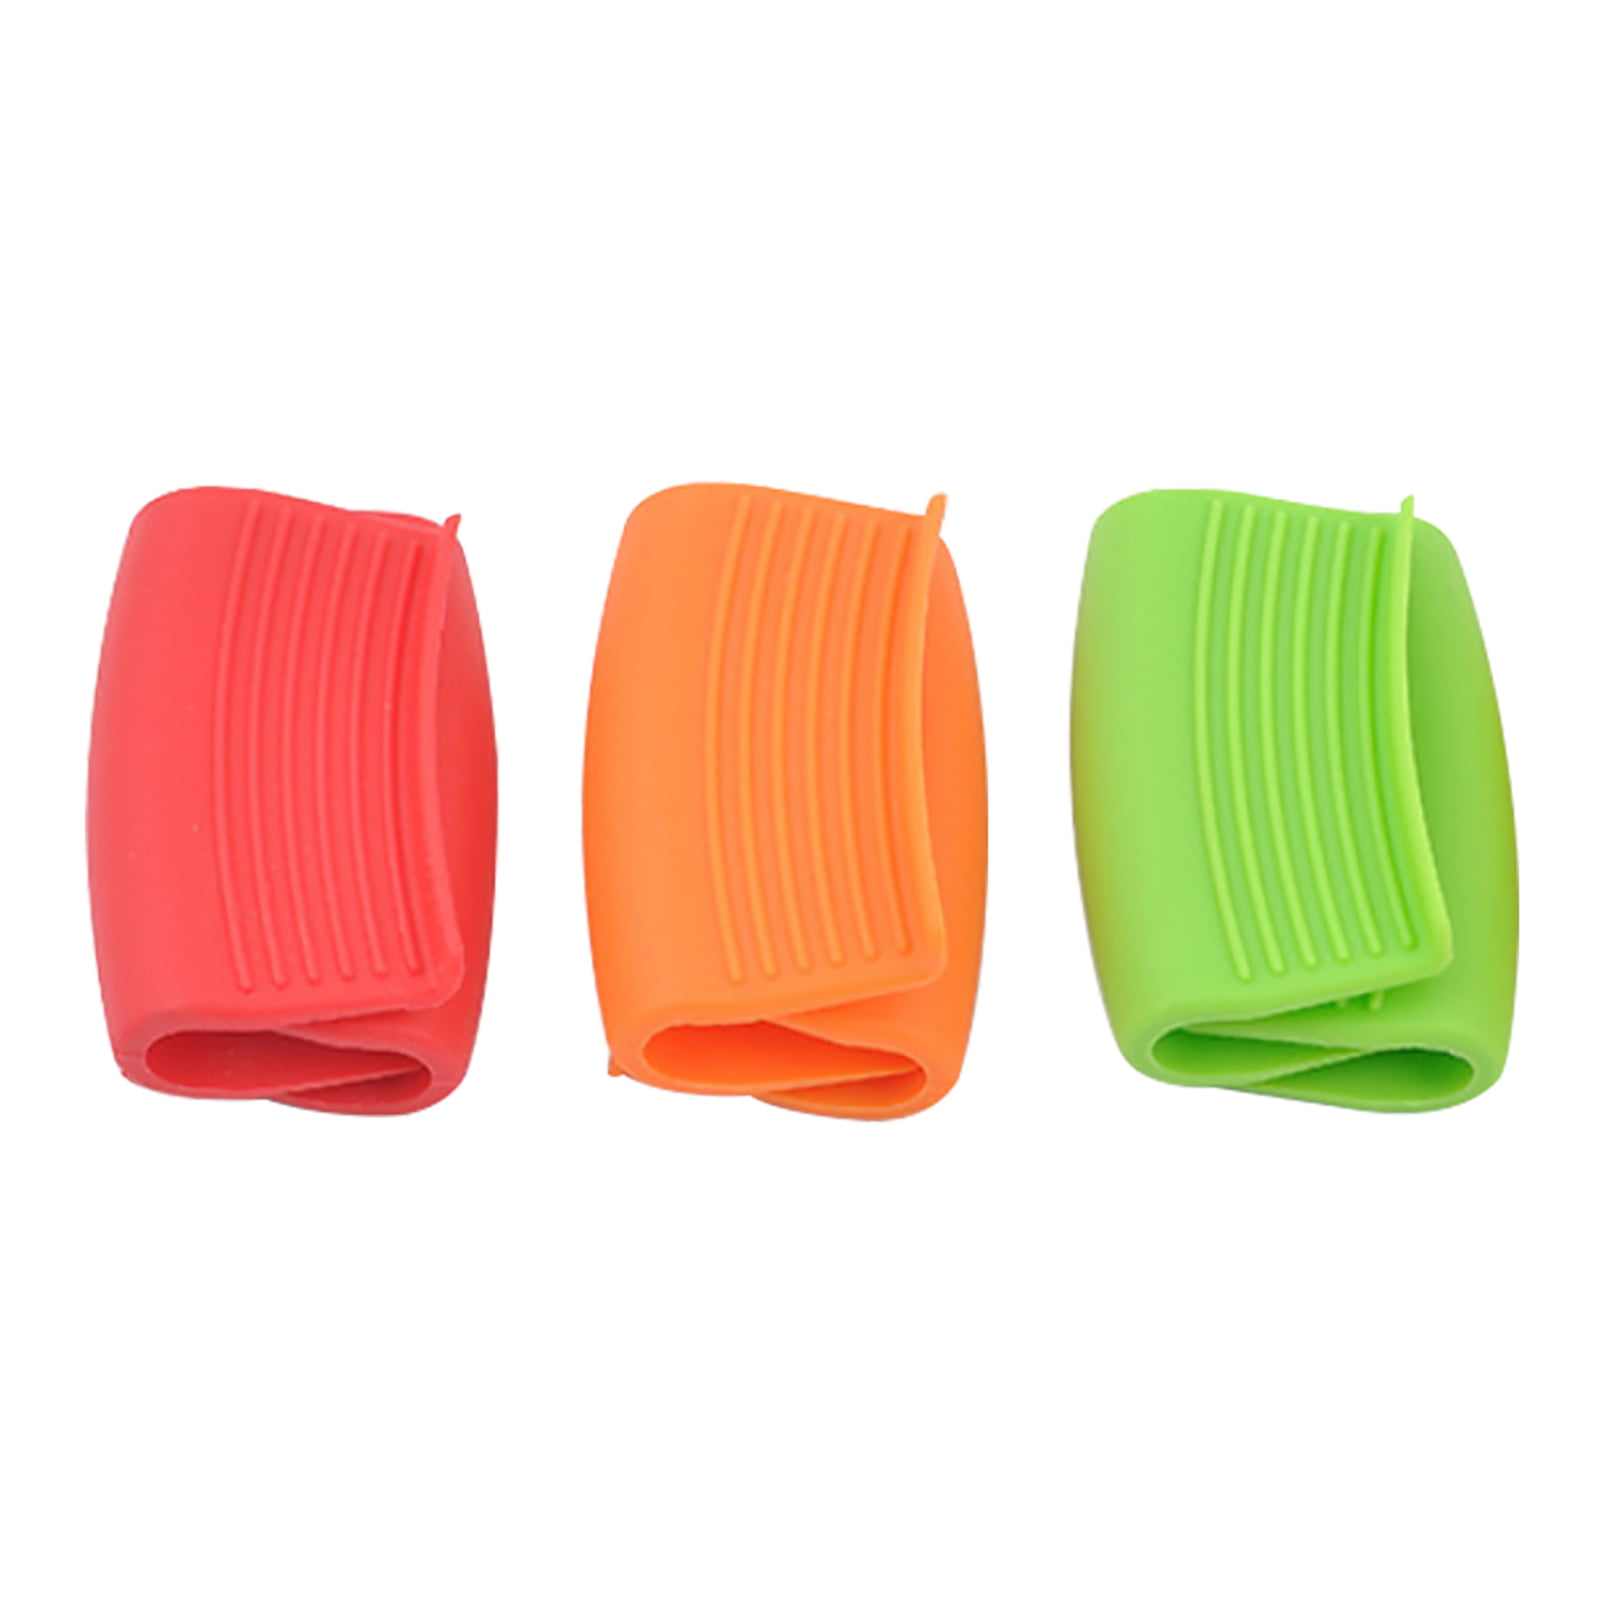 Pot Grip Silicone Oven Trays Hot Handle Sleeve Assist Handle 